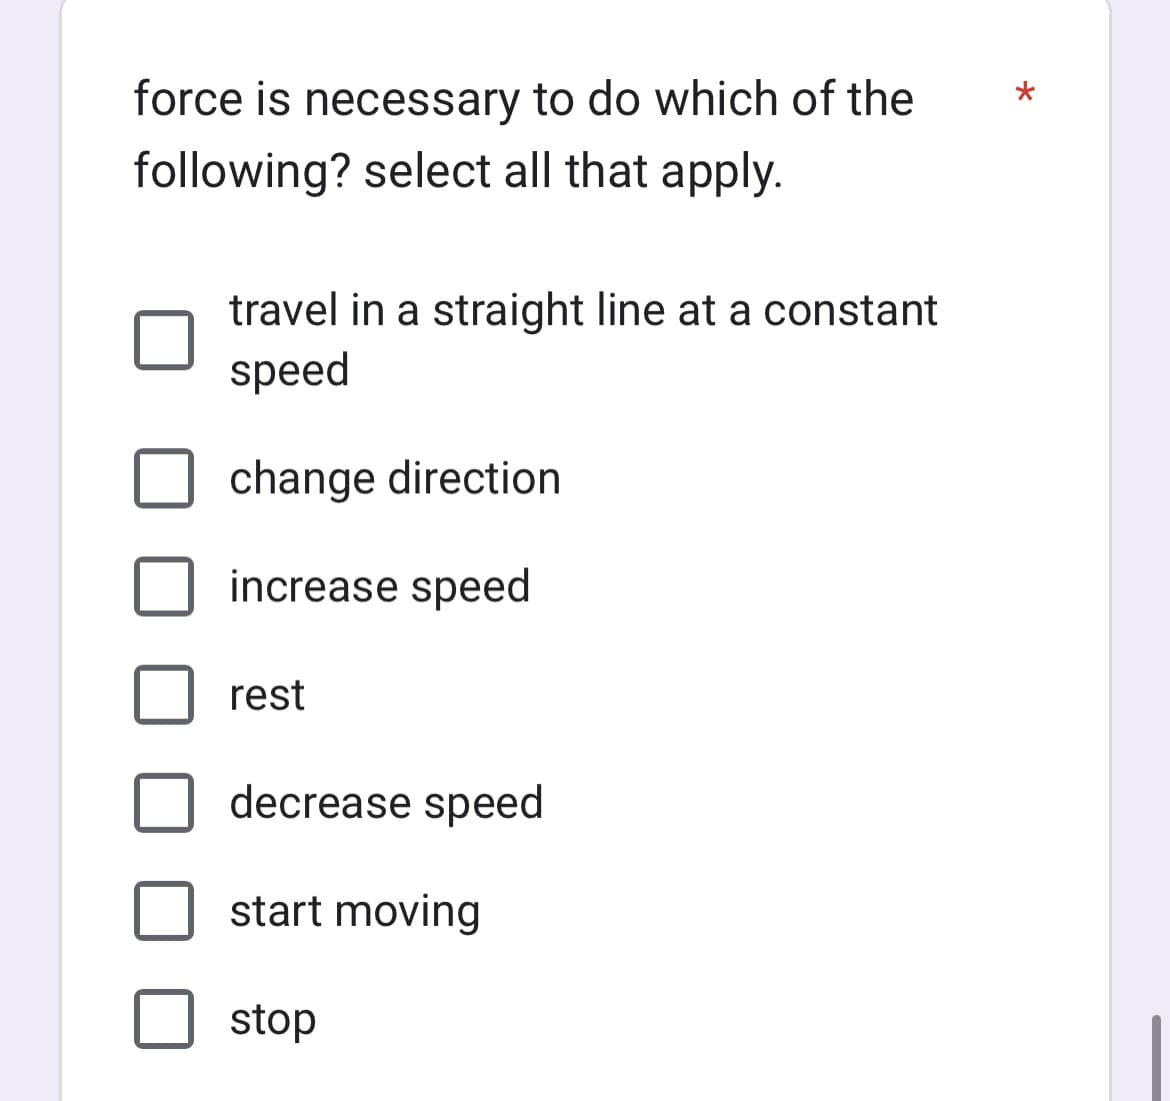 force is necessary to do which of the
following? select all that apply.
travel in a straight line at a constant
speed
change direction
increase speed
rest
decrease speed
start moving
stop
*